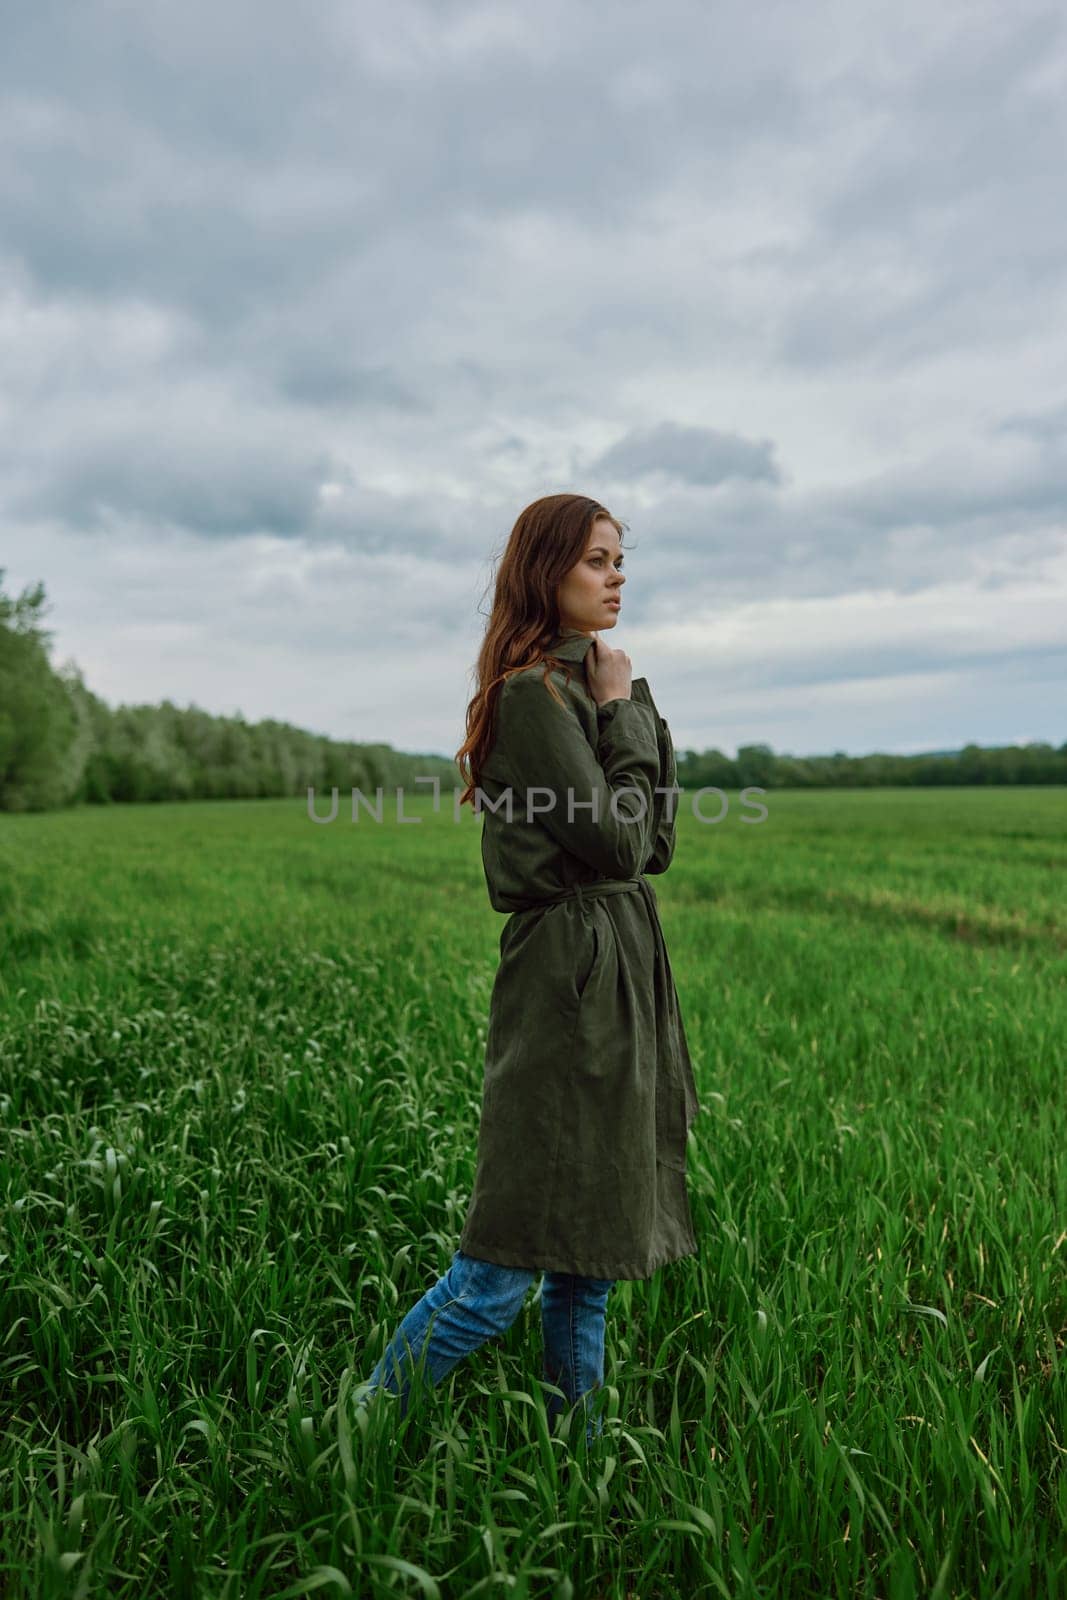 a beautiful woman in a dark coat stands in a green field in the spring in rainy weather. High quality photo